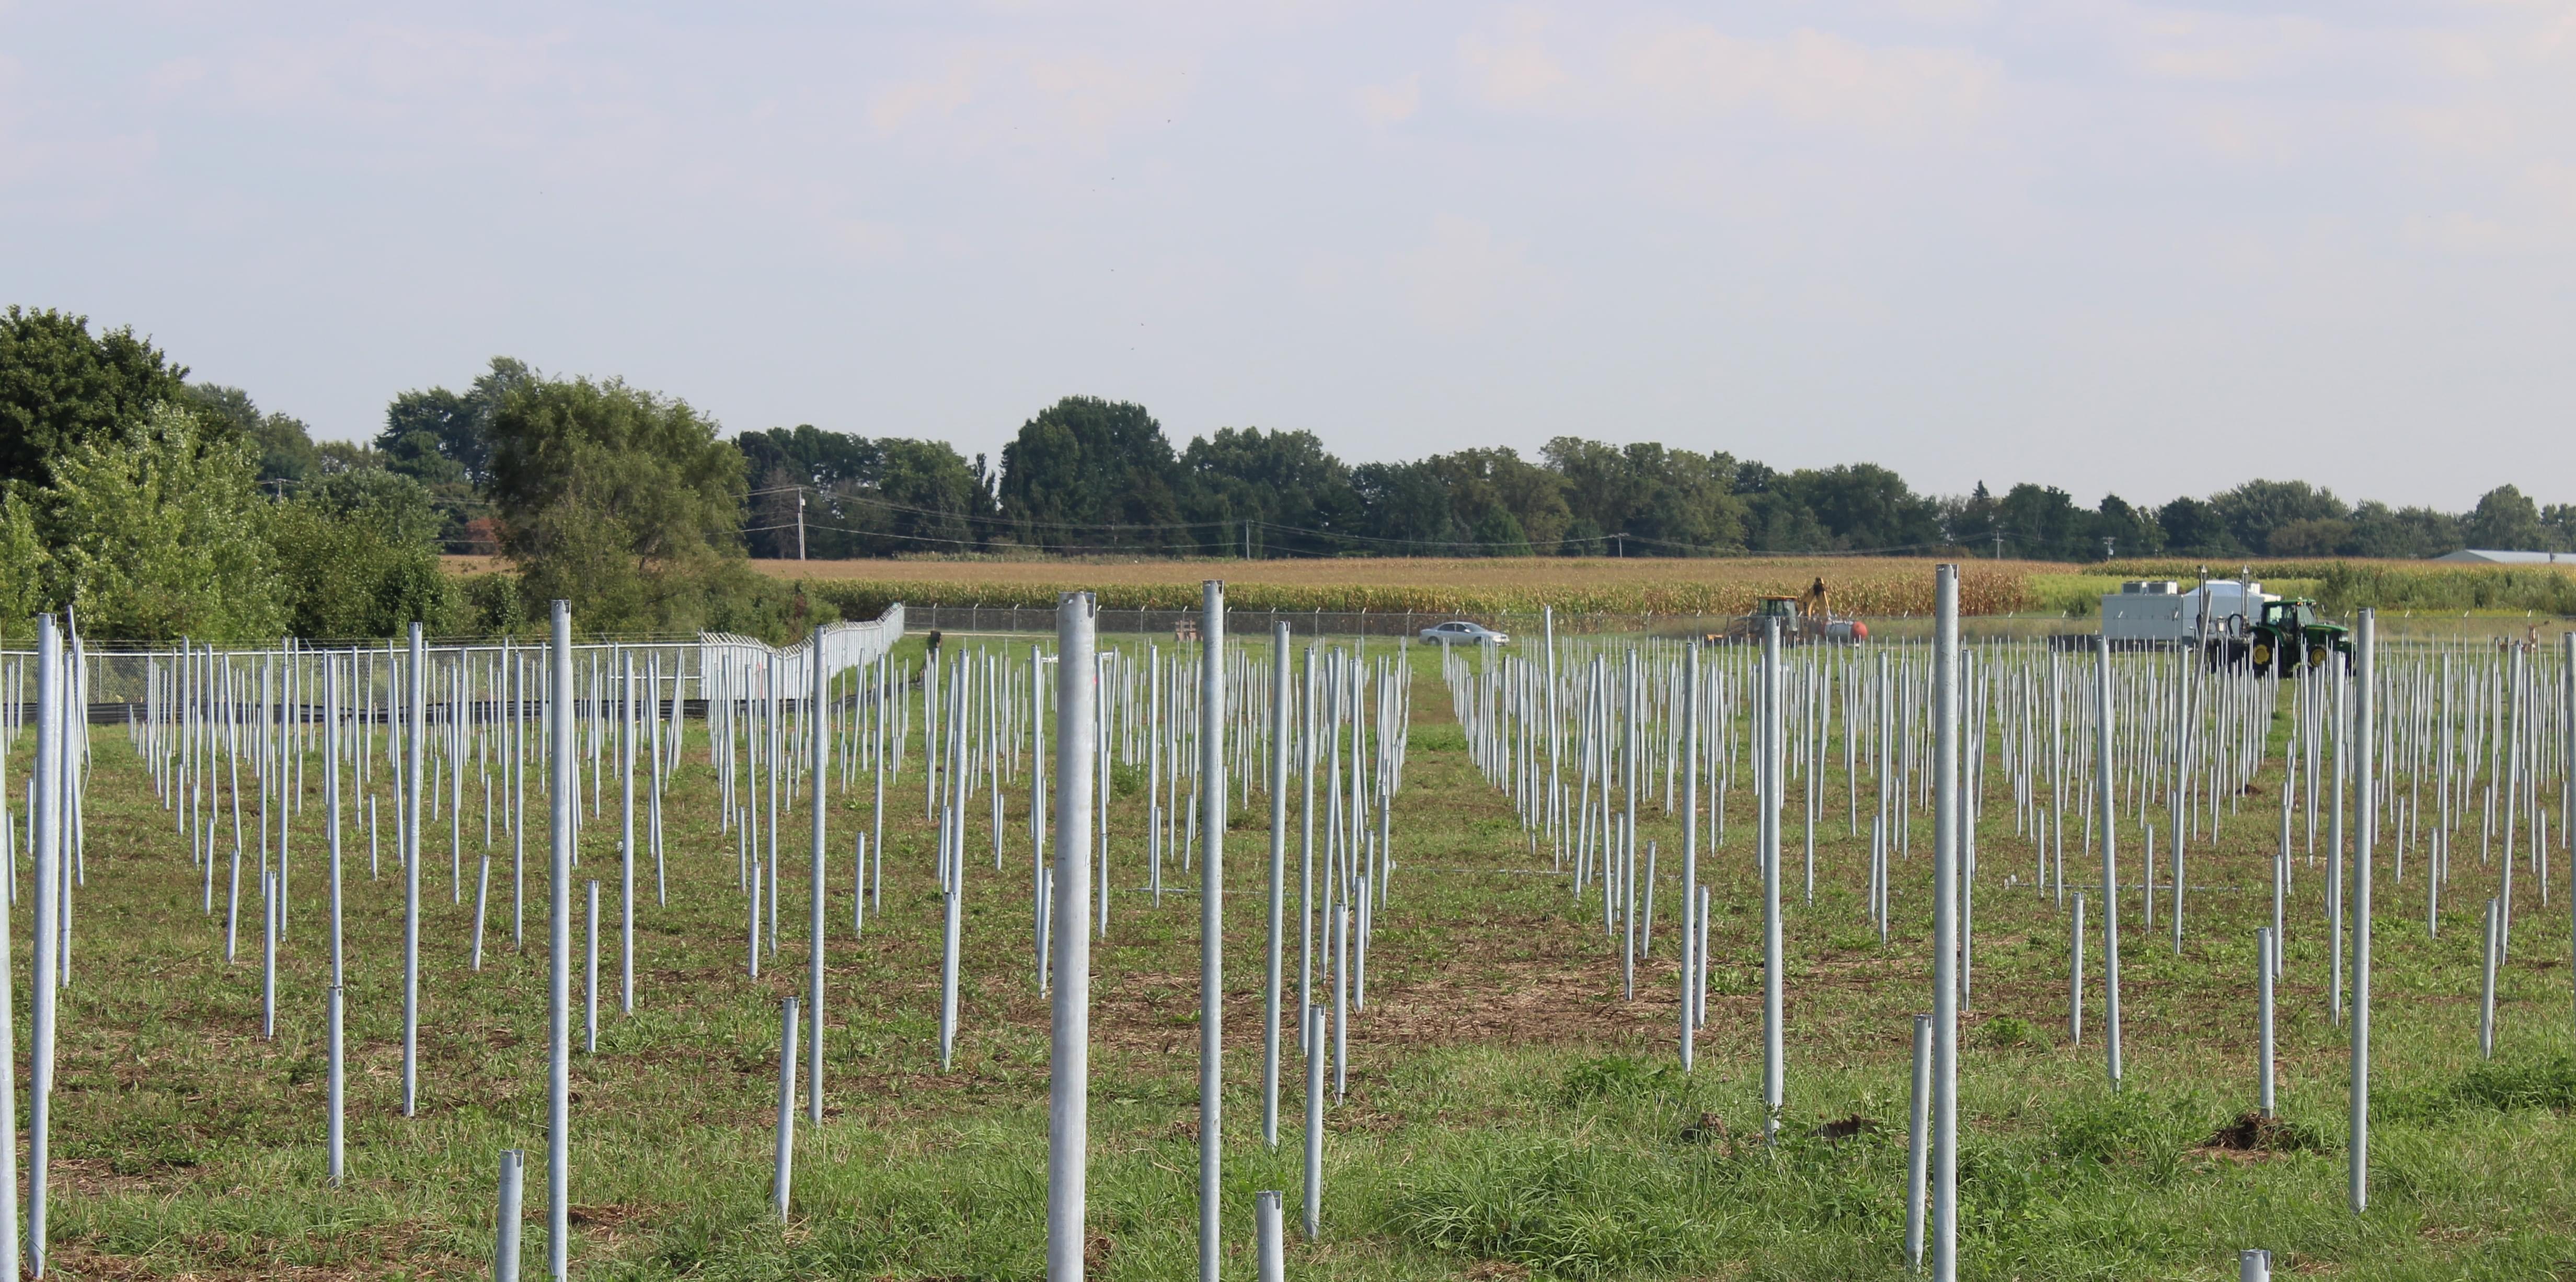 The site along Windsor Road on the University of Illinois Urbana campus, where a solar farm is under construction.